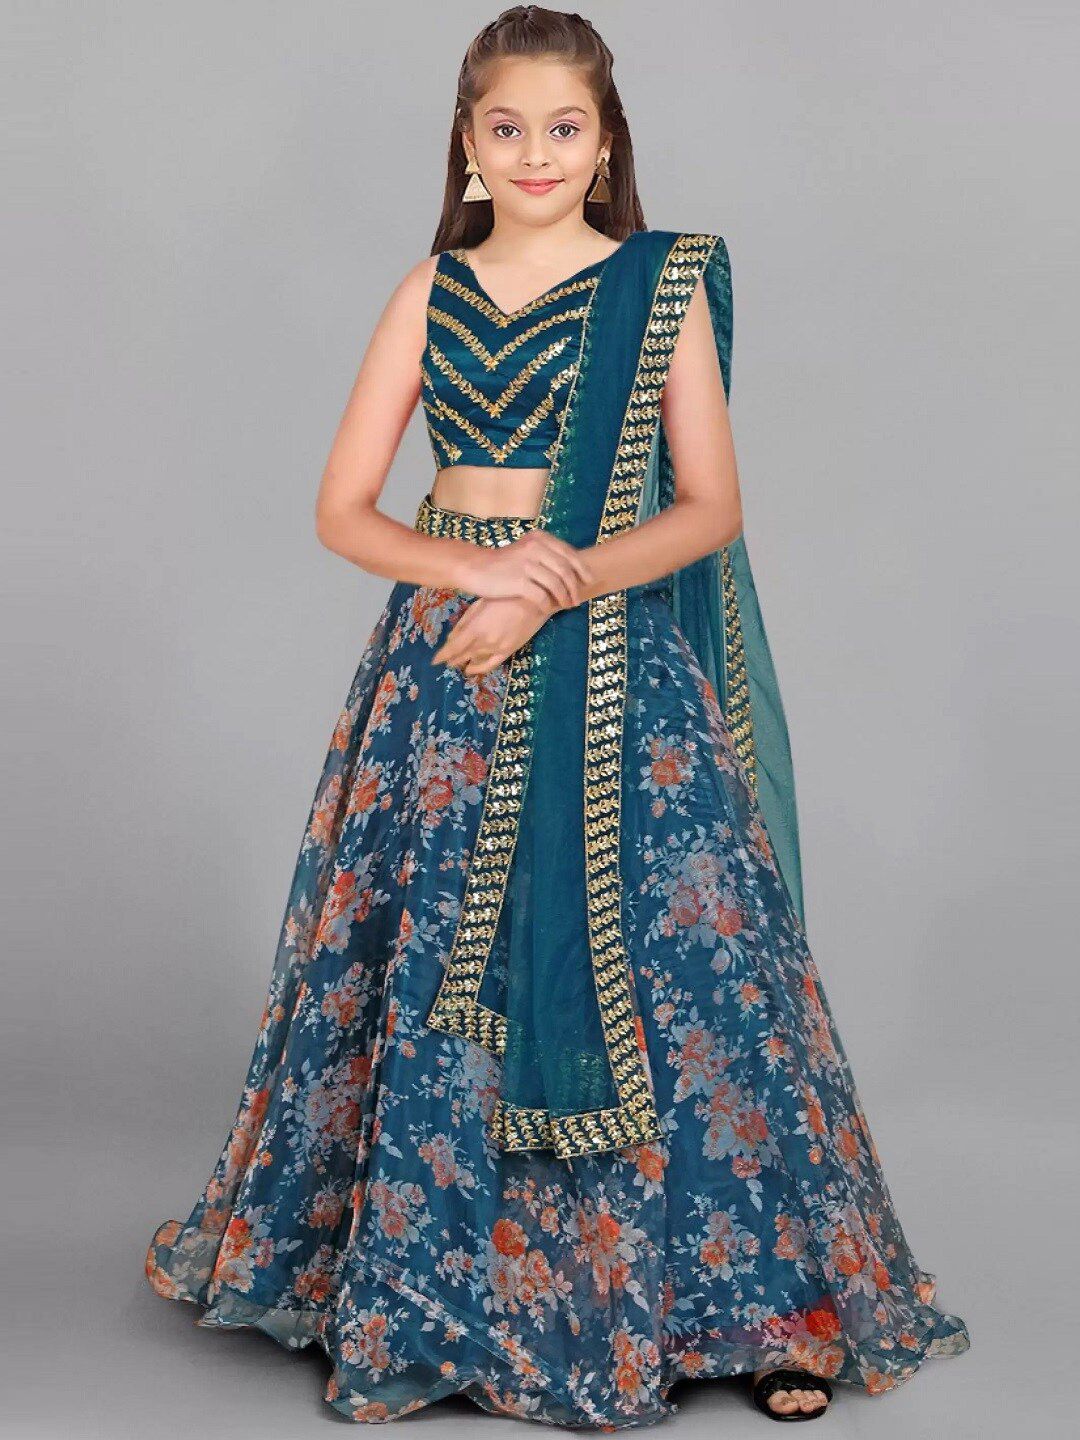 BAESD Girls Floral Printed Silk Semi-Stitched Lehenga & Unstitched Blouse With Dupatta Price in India